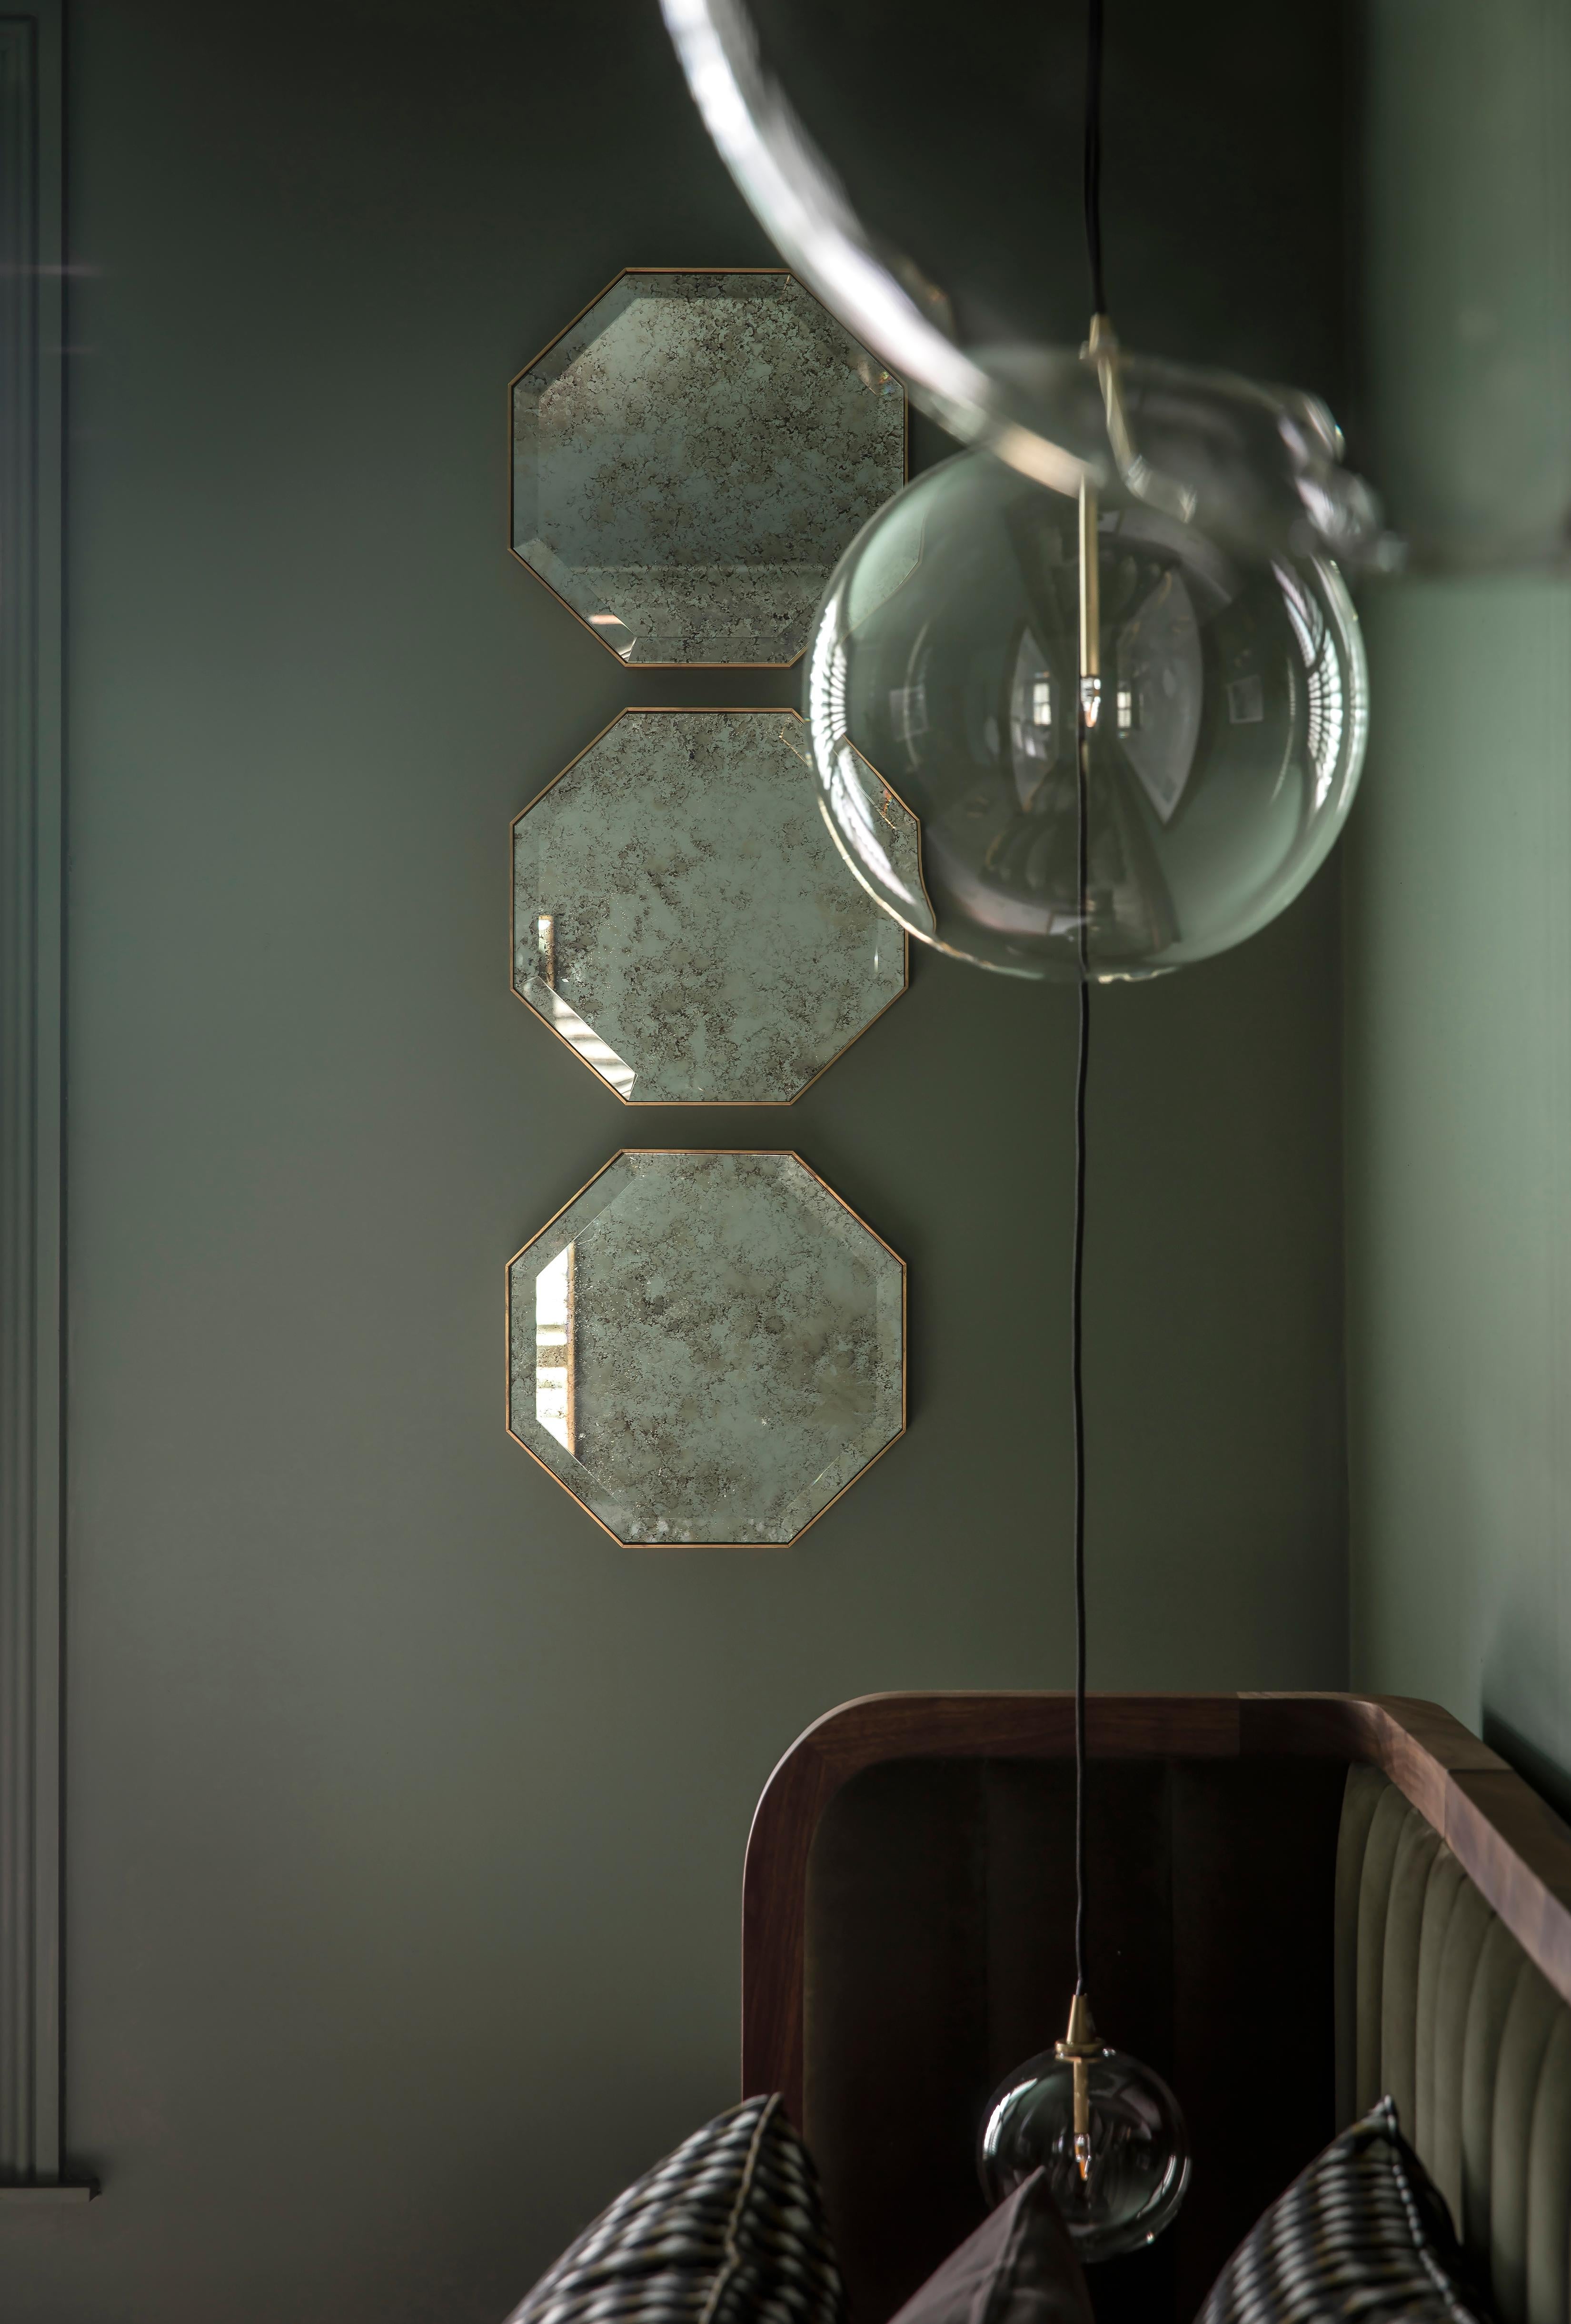 Mirrors are sometimes overrated with lack of design and personality. Eros defies these ideas with a antique-style mirror and a delicate, beveled Art Deco frame available in solid brass as well as steel powder-coated. Designed to be displayed in